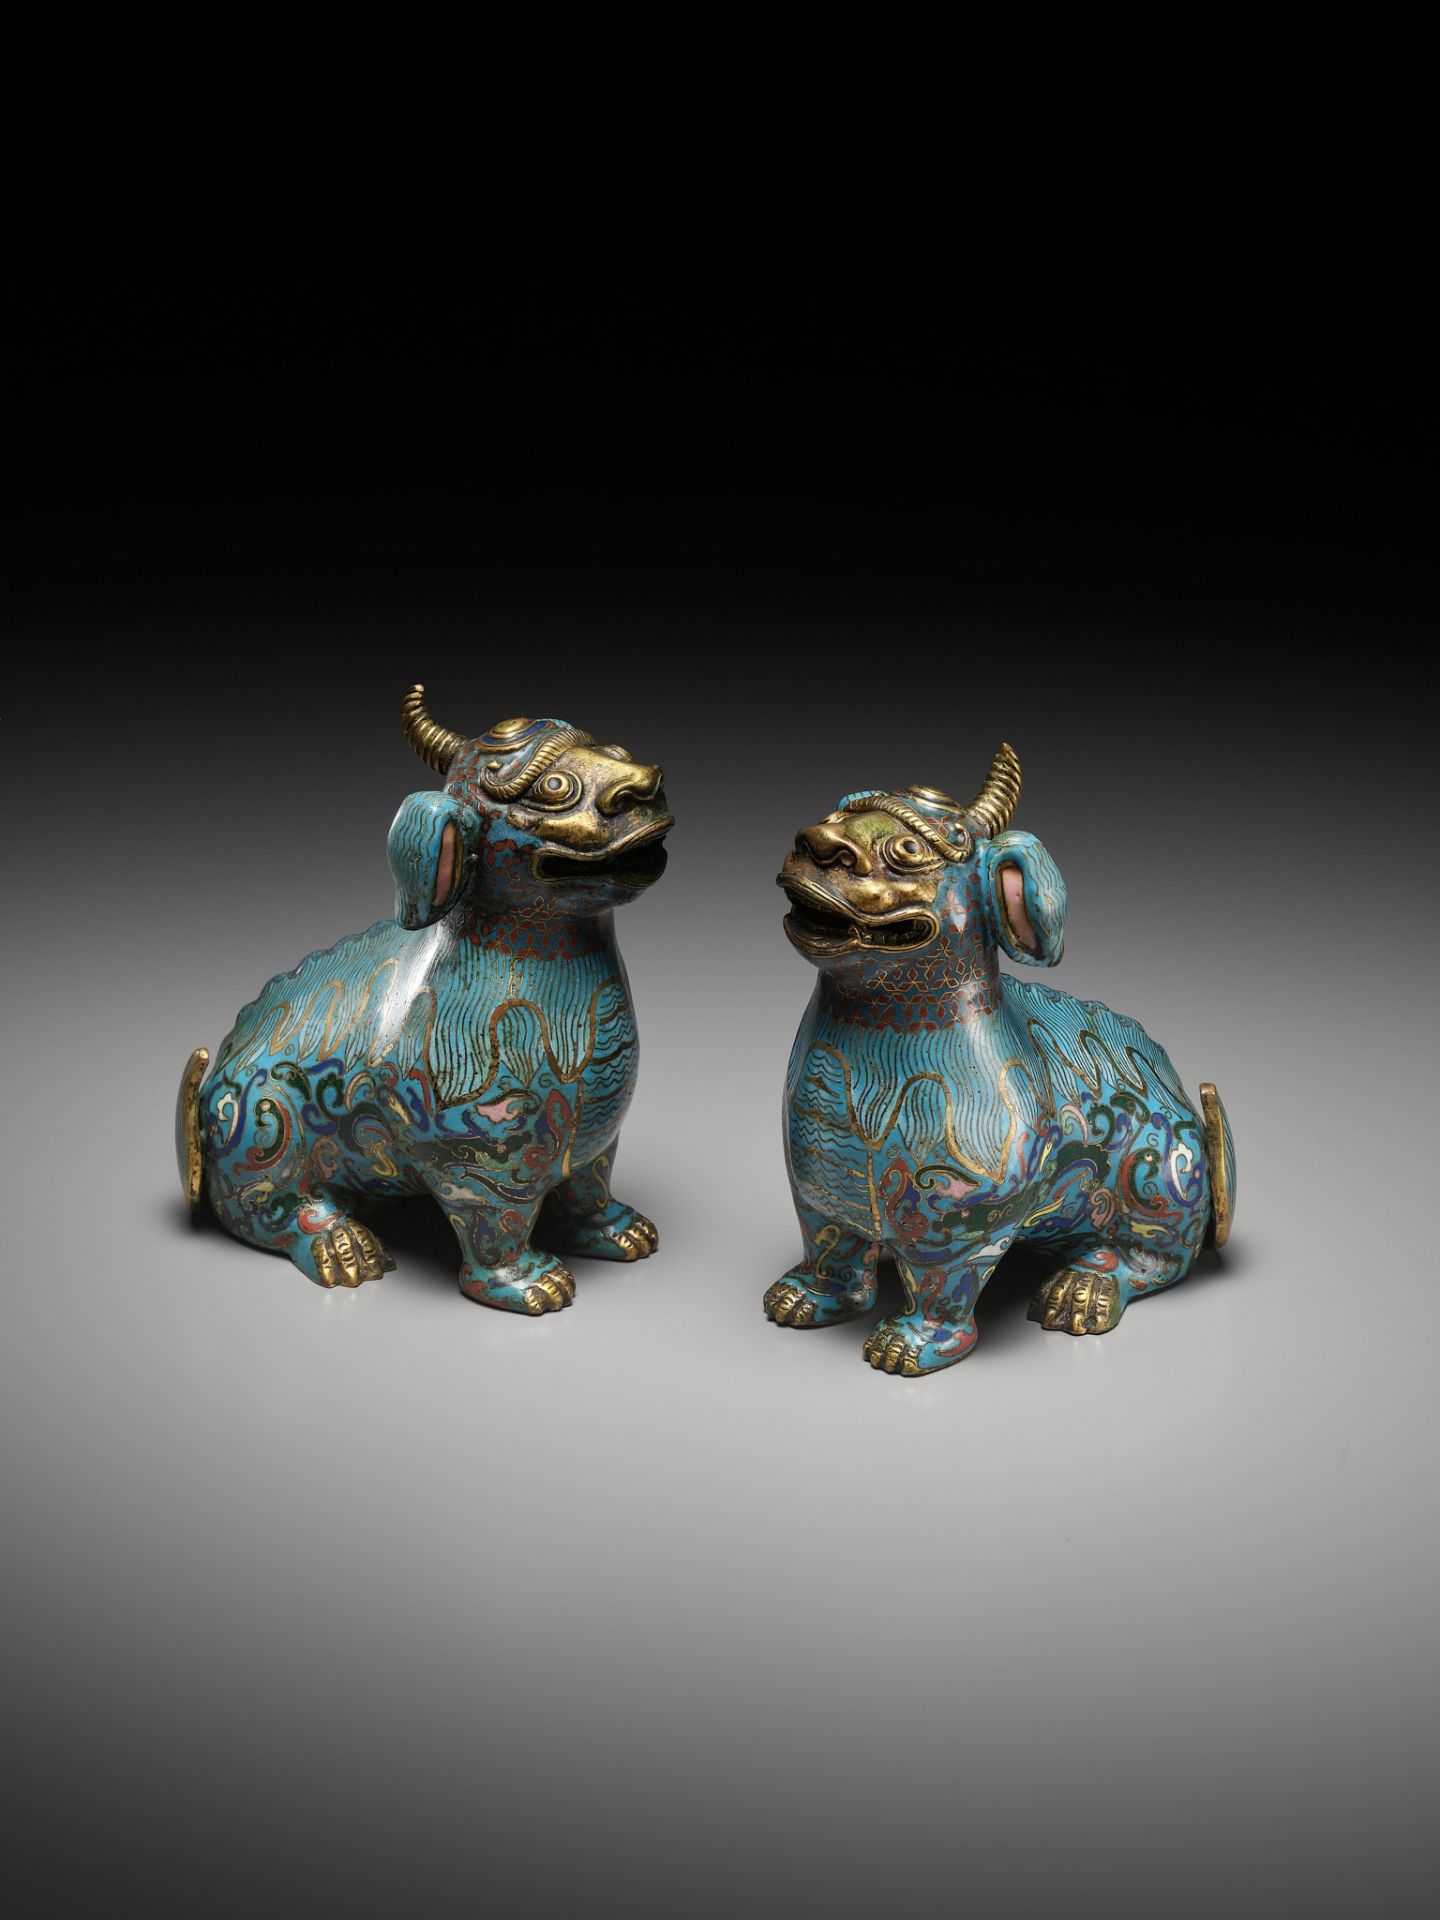 A PAIR OF GILT-BRONZE AND CLOISONNE ENAMEL LUDUAN, CHINA, 18TH - 19TH CENTURY - Image 8 of 11